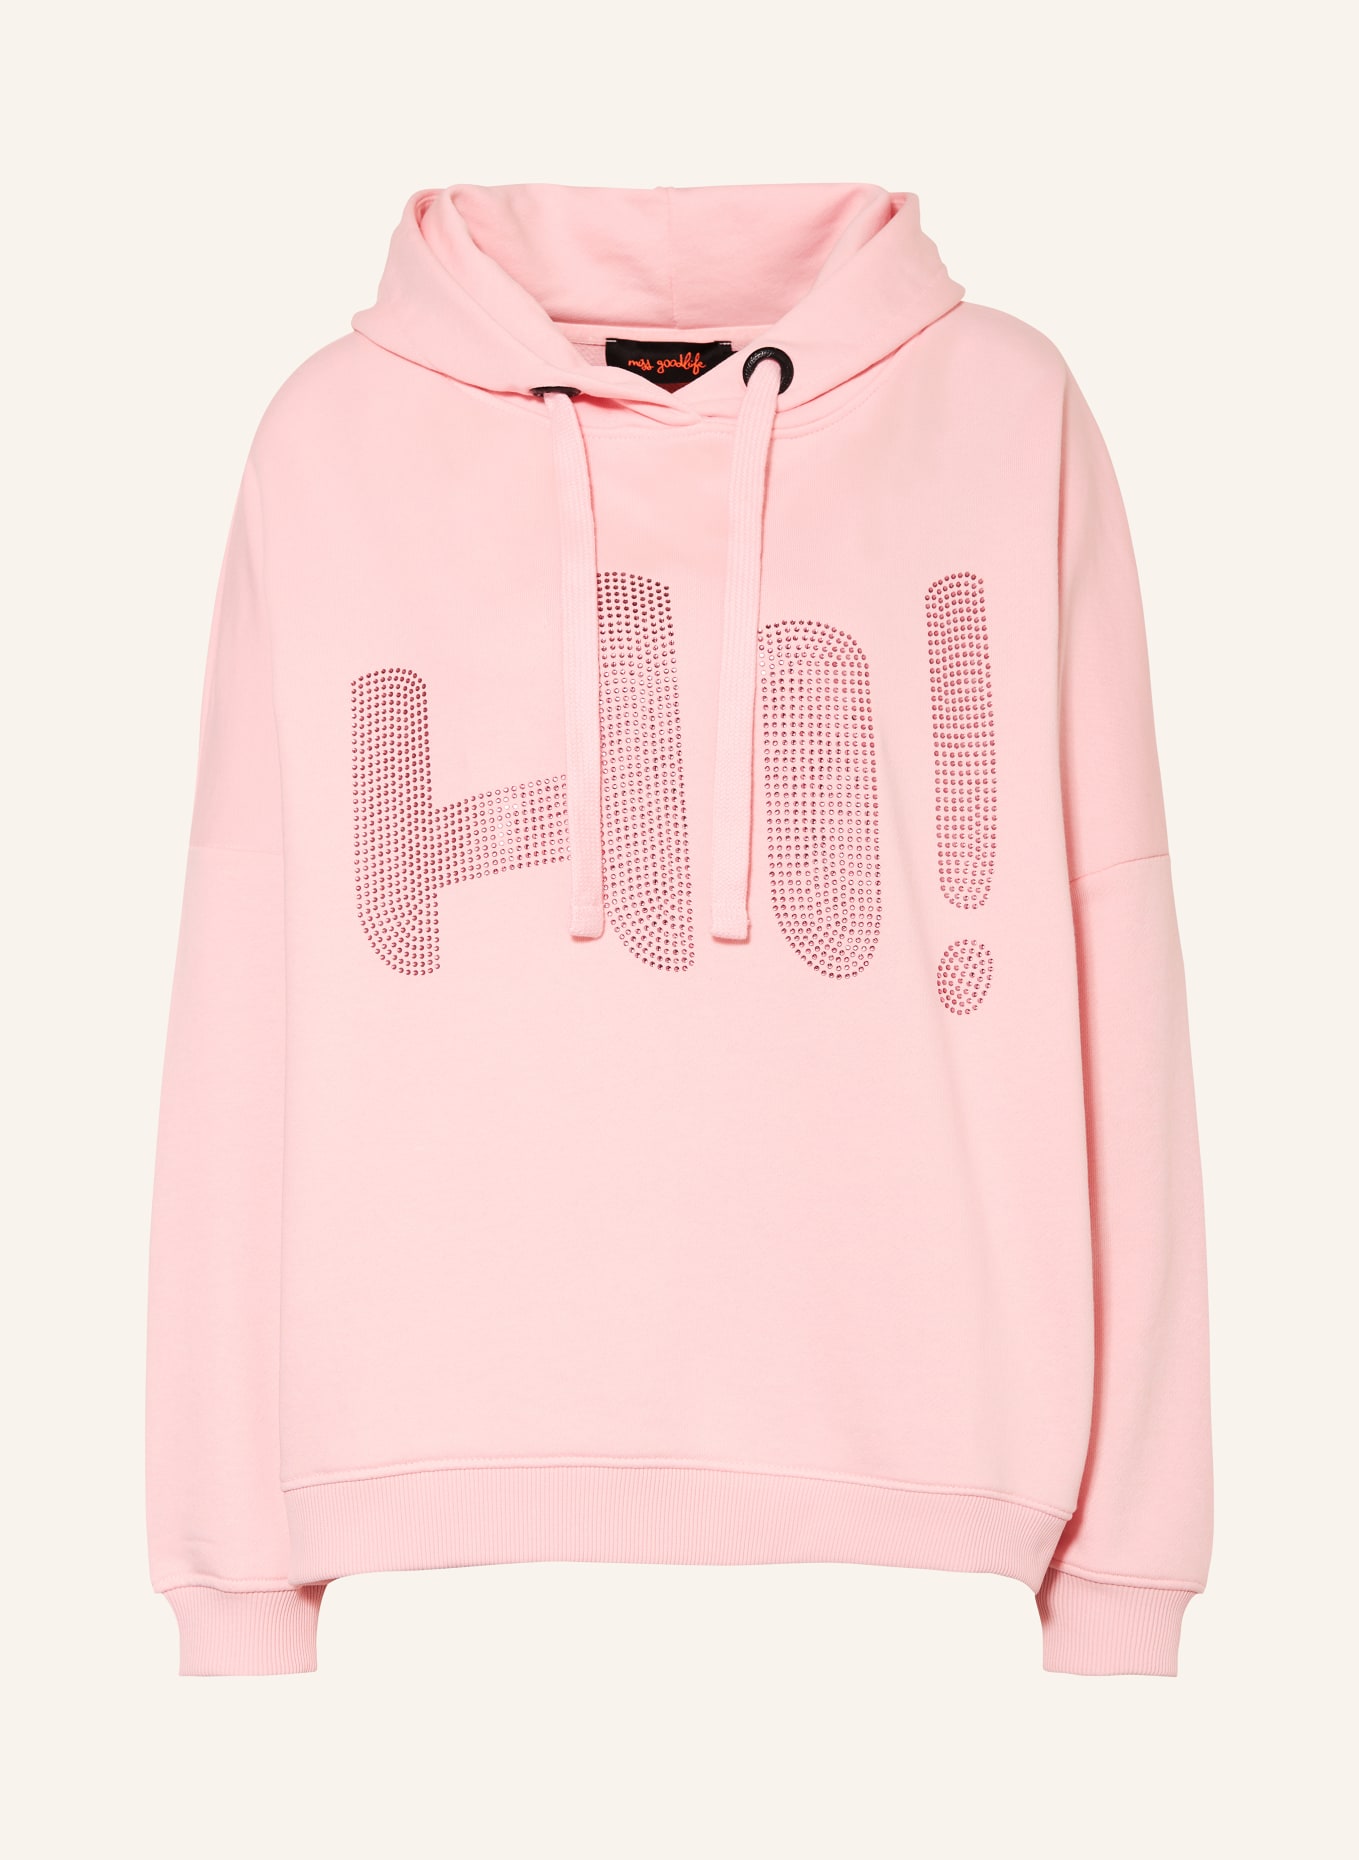 miss goodlife Hoodie with decorative gems, Color: LIGHT PINK (Image 1)